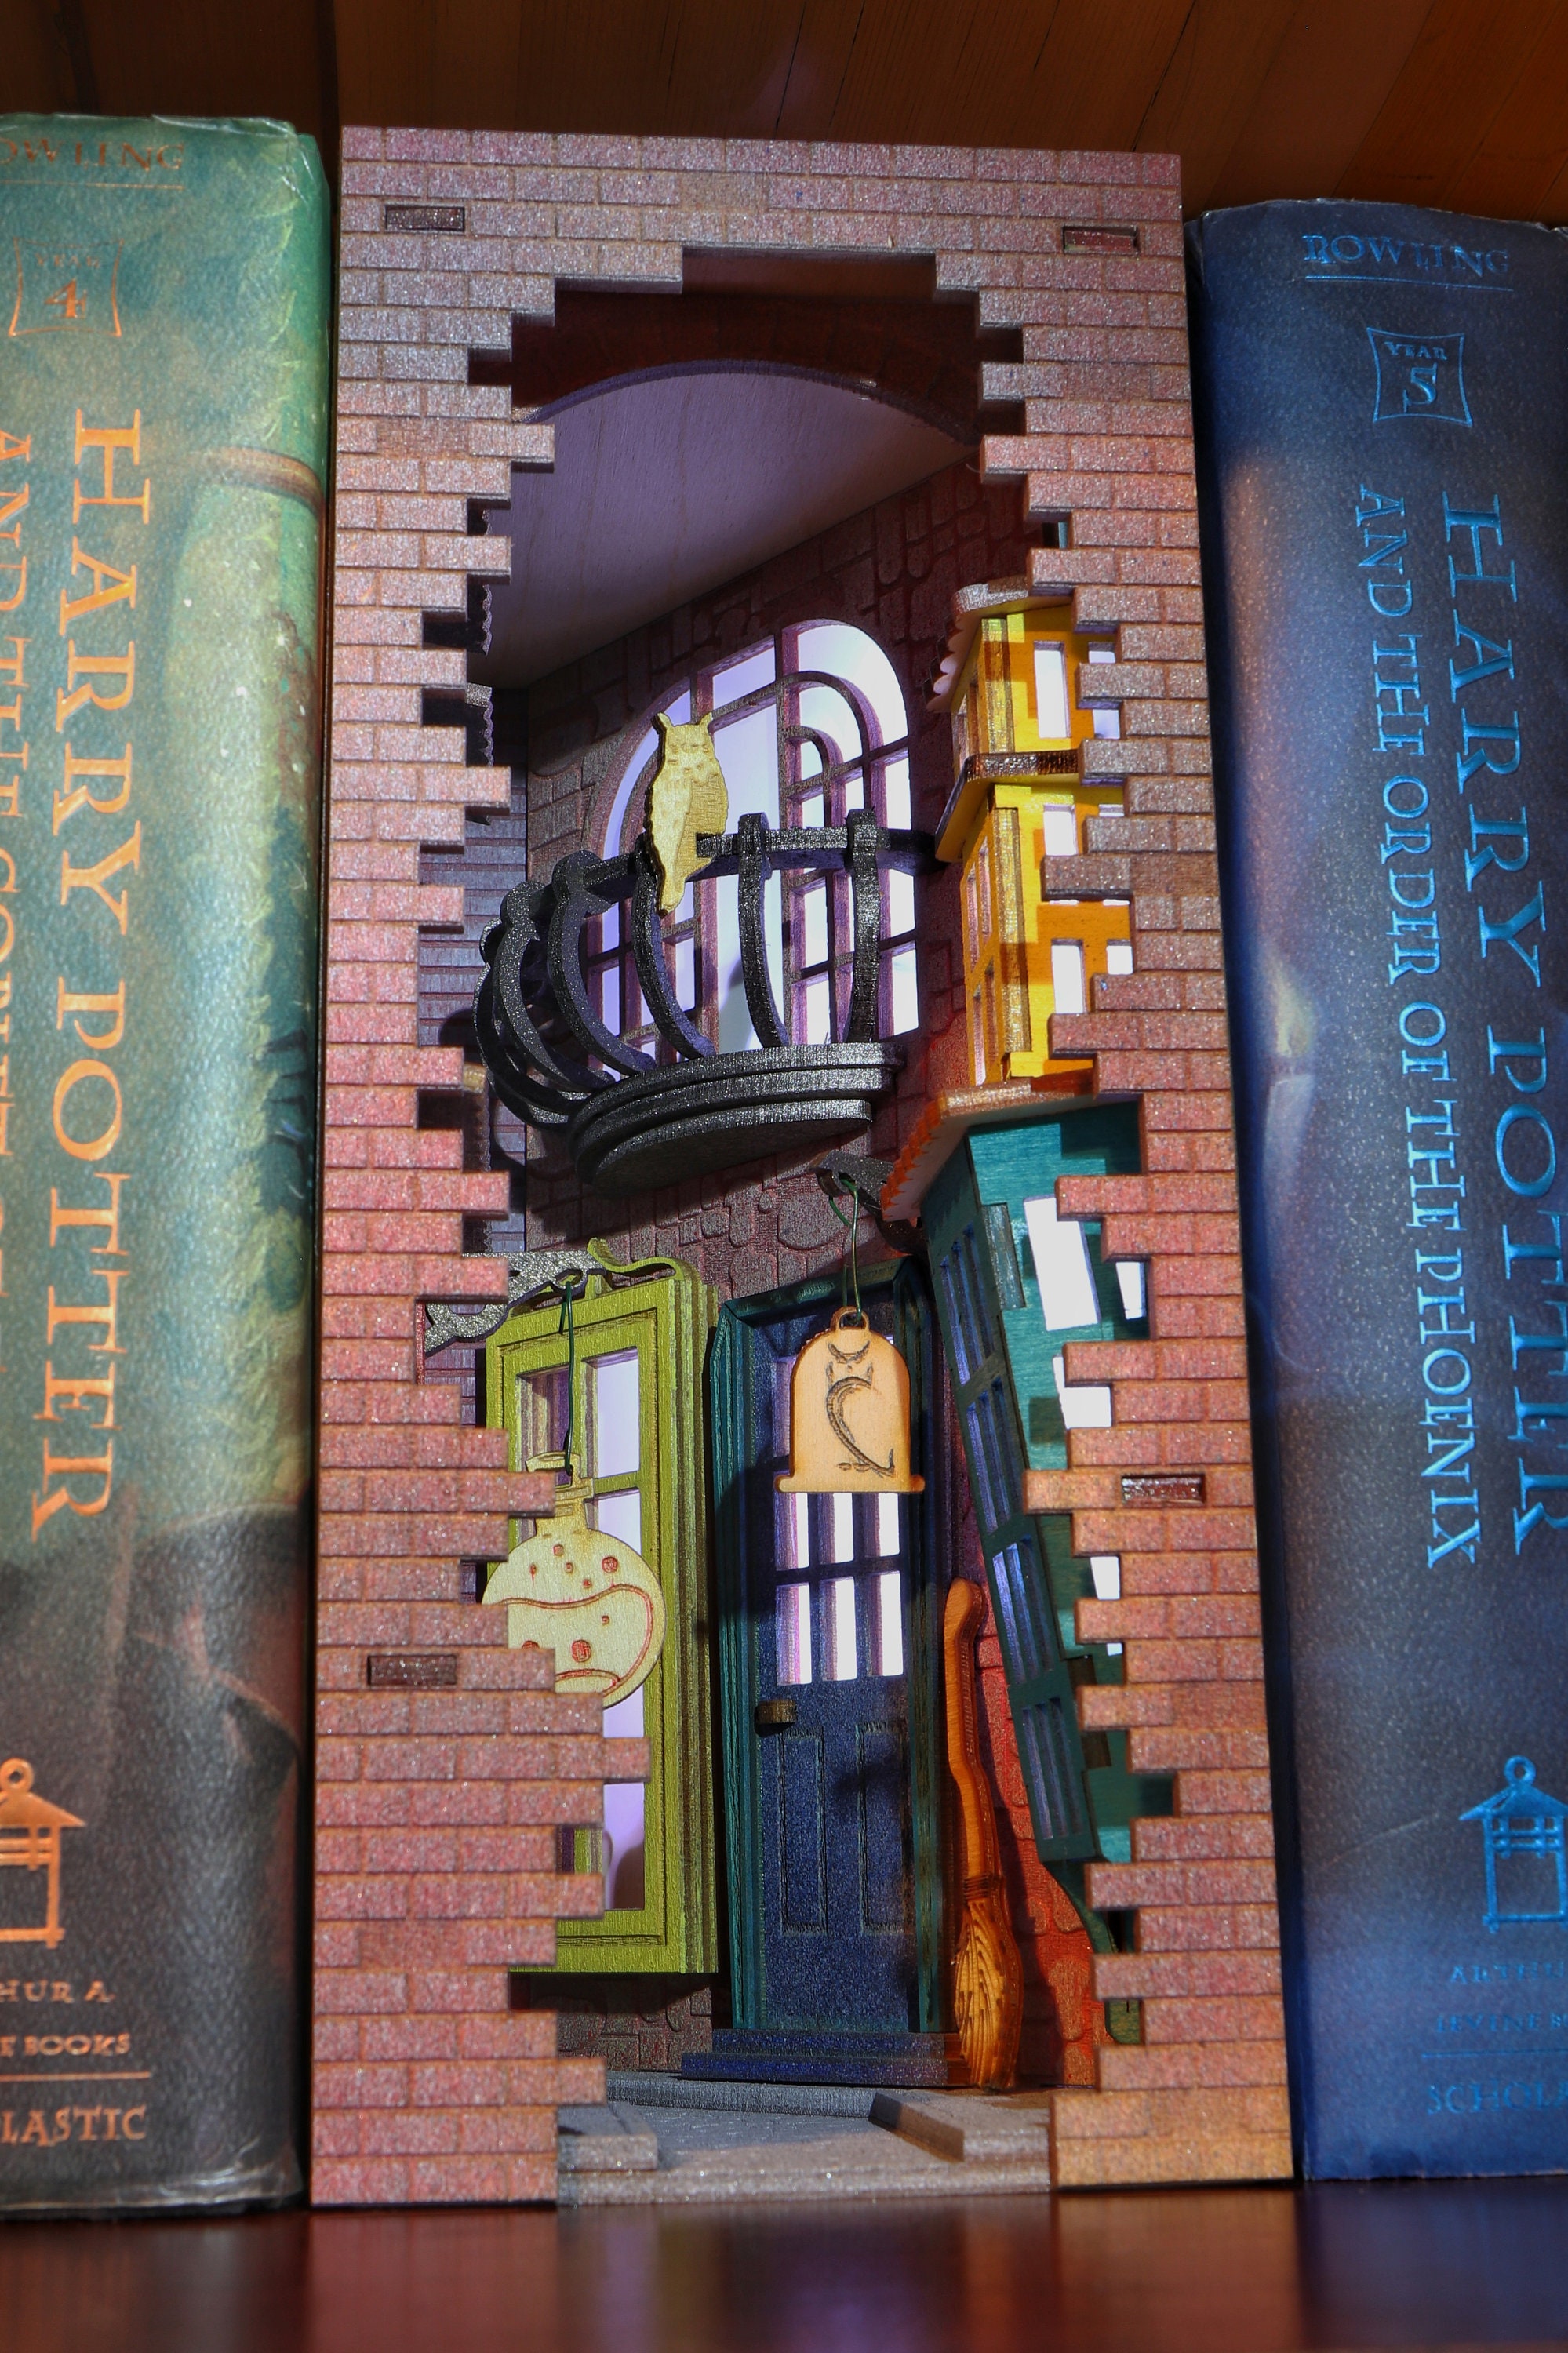 CWWH-Onlineshop - Book Nook / Harry Potter - Magic Alley